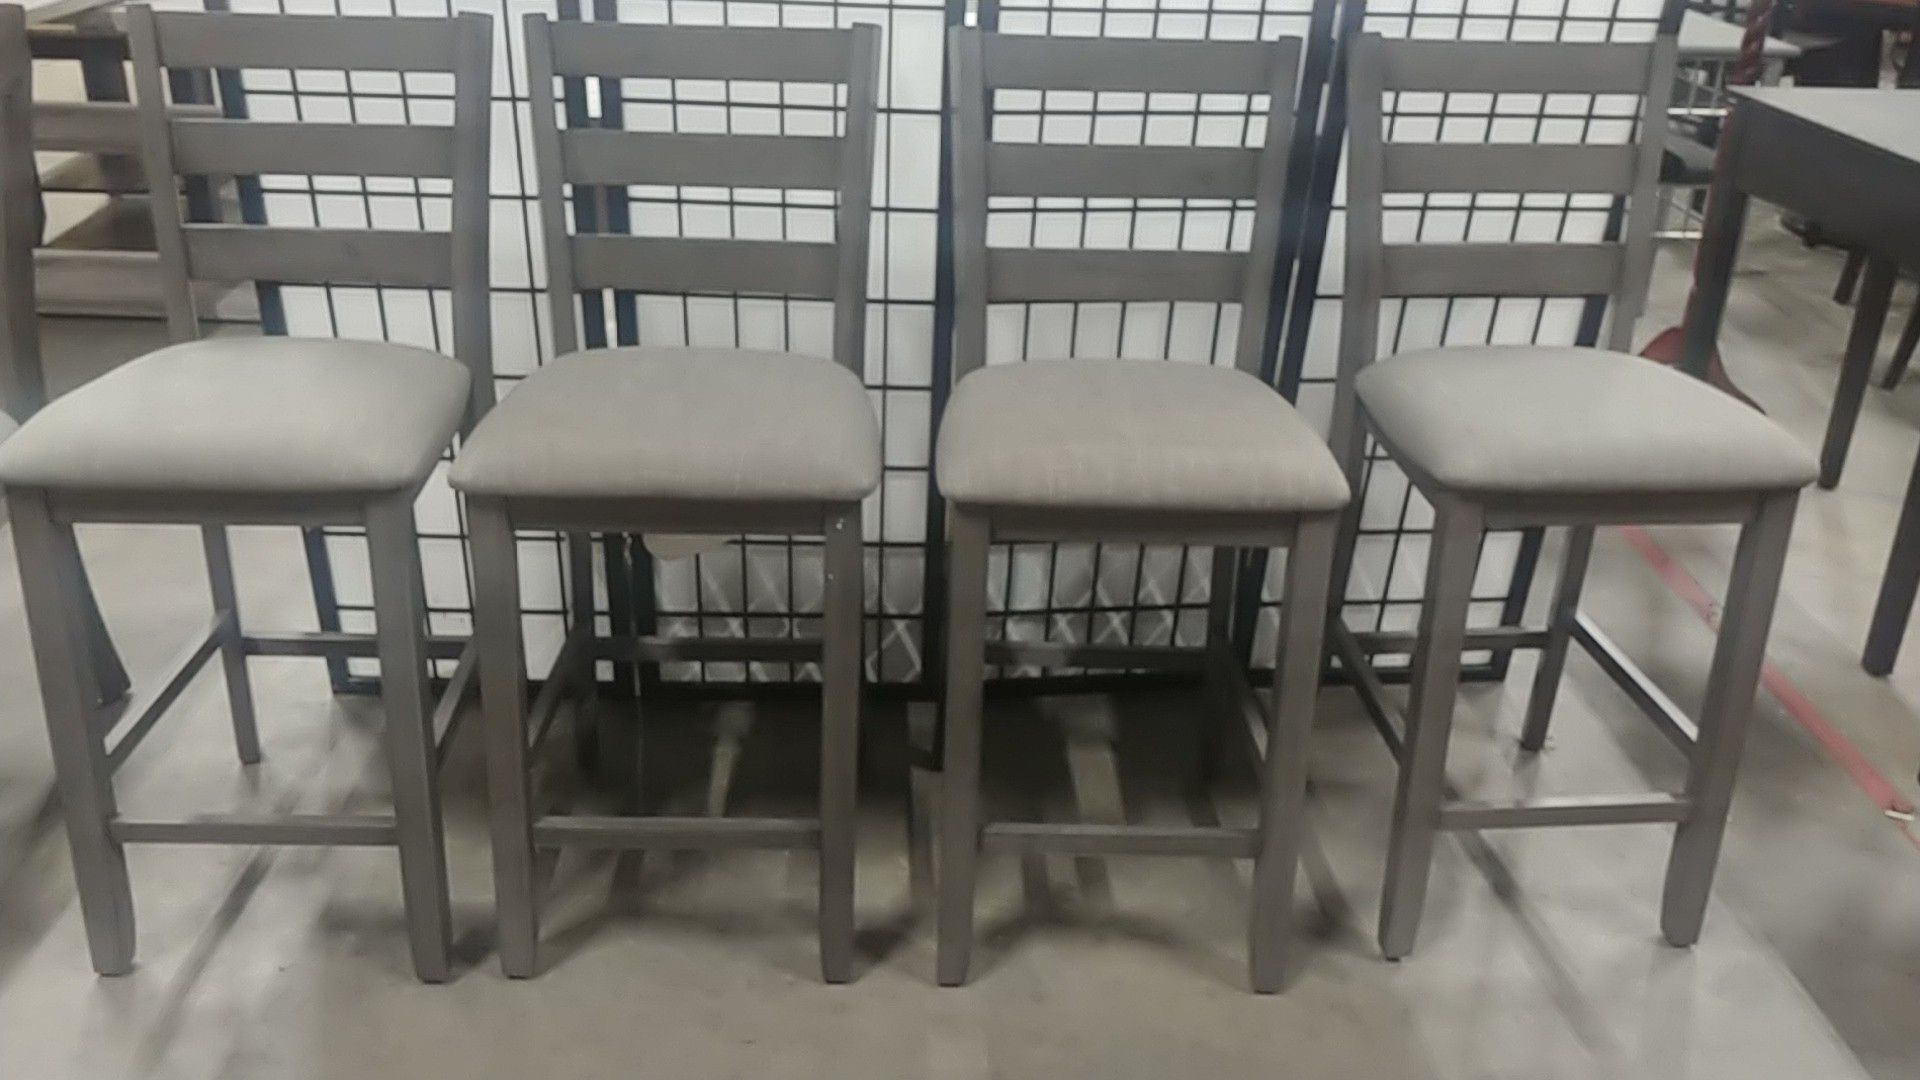 Set of 4 grey counter Height Dining Chairs / Stools Display Model WAREHOUSE Sale